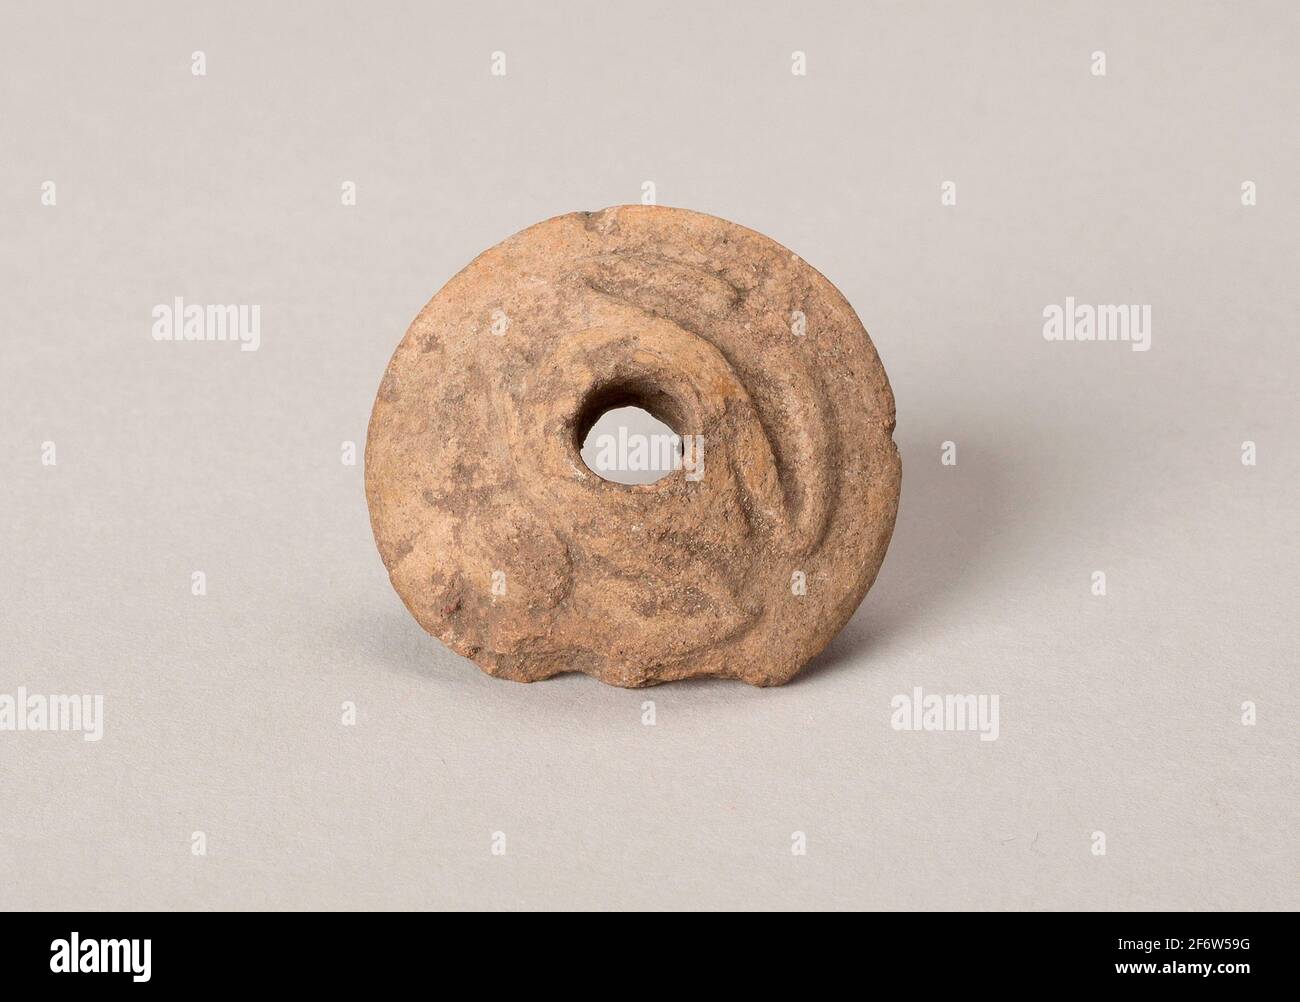 Author: Aztec (Mexica). Ear Ornament or Spindle Whorl with Modeled Frog Motifs - A.D. 1450/1521 - Aztec (Mexica) Valley of Mexico, Mexico. Ceramic. Stock Photo